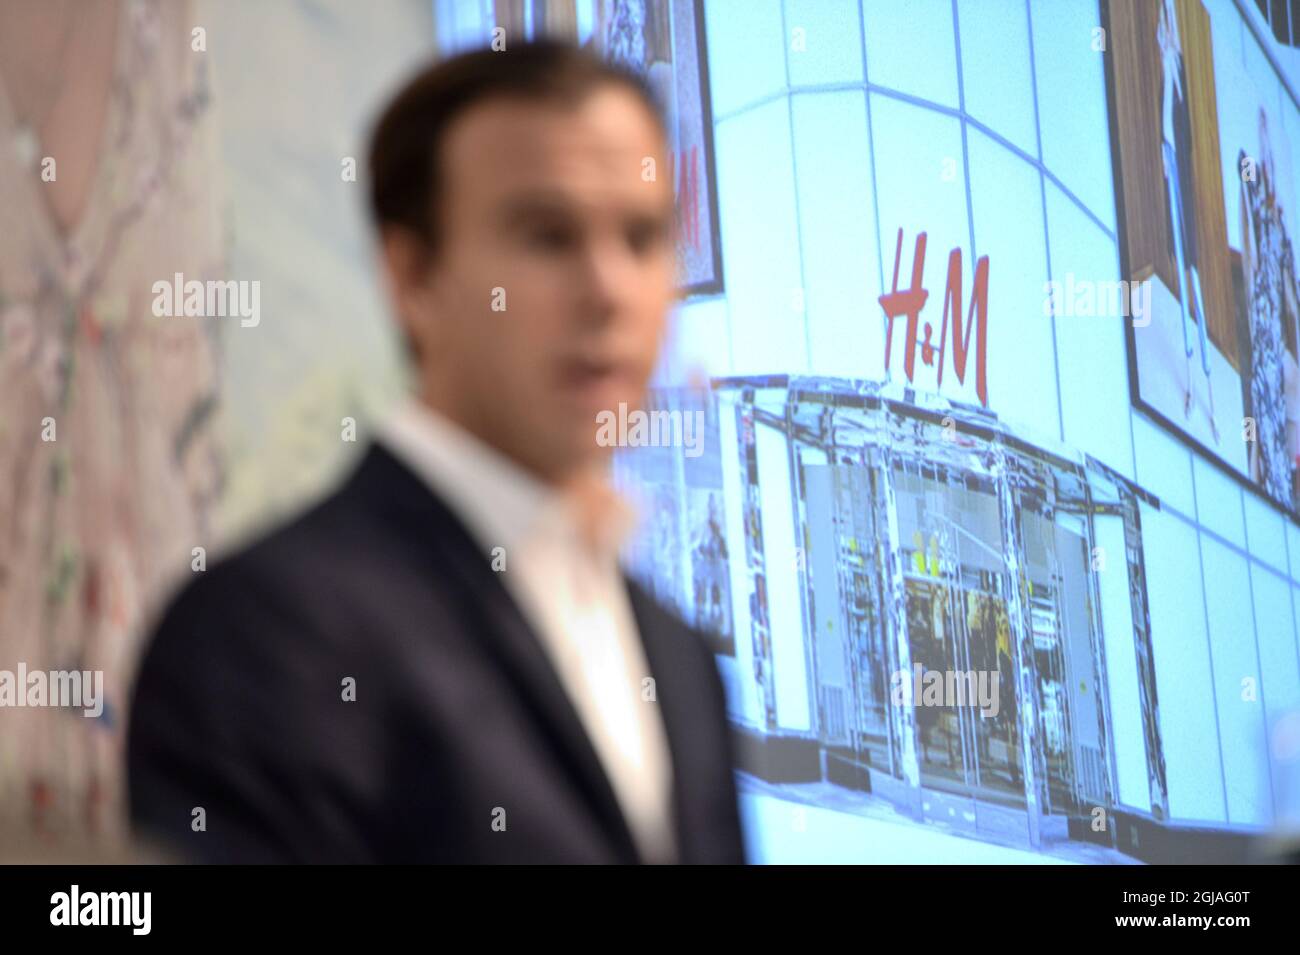 STOCKHOLM 20170131 HM:s CEO, Karl-Johan Persson, is seen during the presentation of the financial report in the companyÂ’s head office in Stockholm, Sweden, January 2017. Foto: Henrik Montgomery / TT kod 10060  Stock Photo